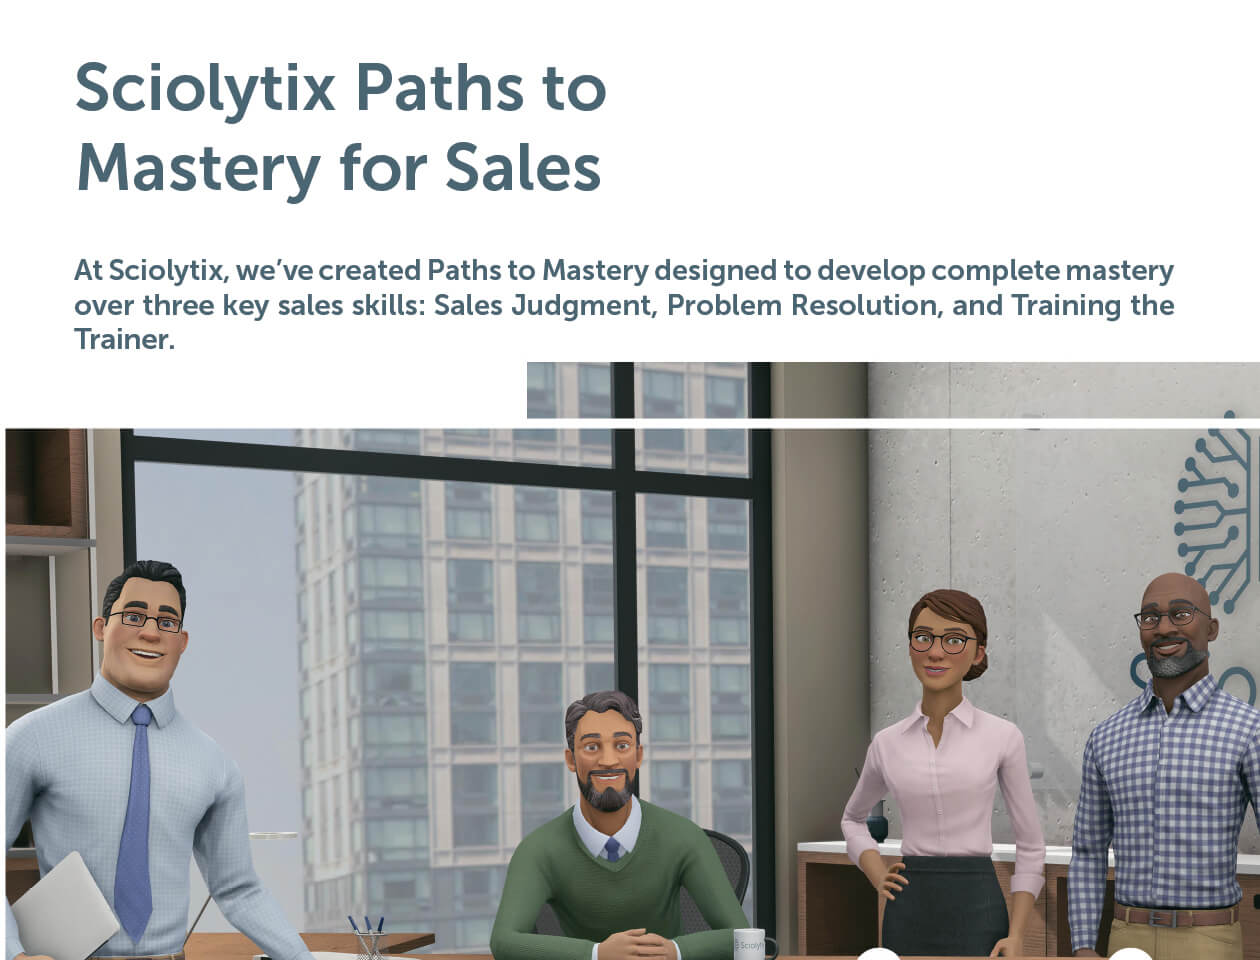 Sciolytix Paths to Mastery for Sales